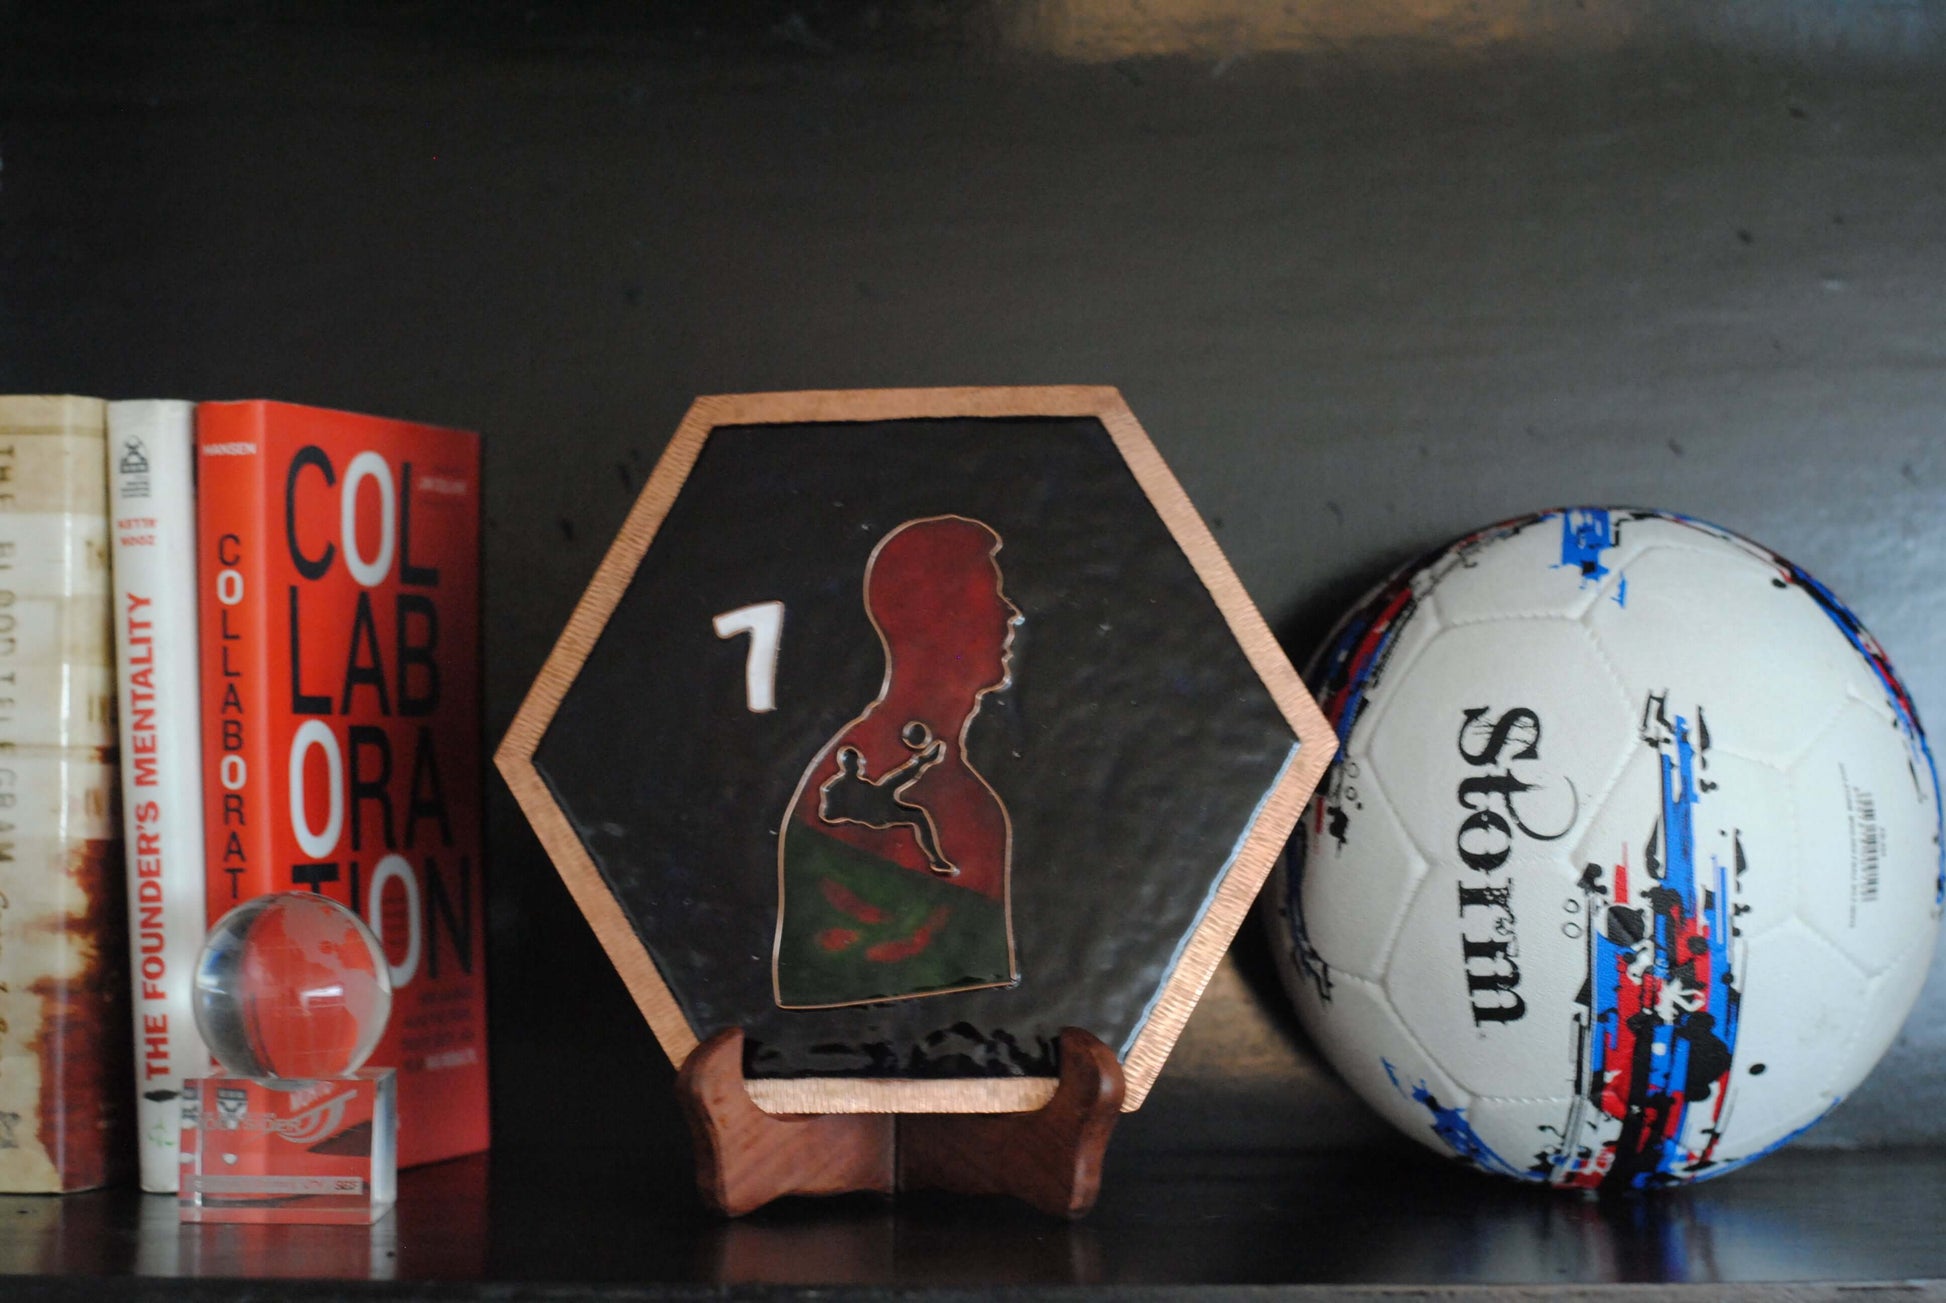 Copper enameled wallplates to celebrate FIFA legacies, Ronaldo. With The Plated Project